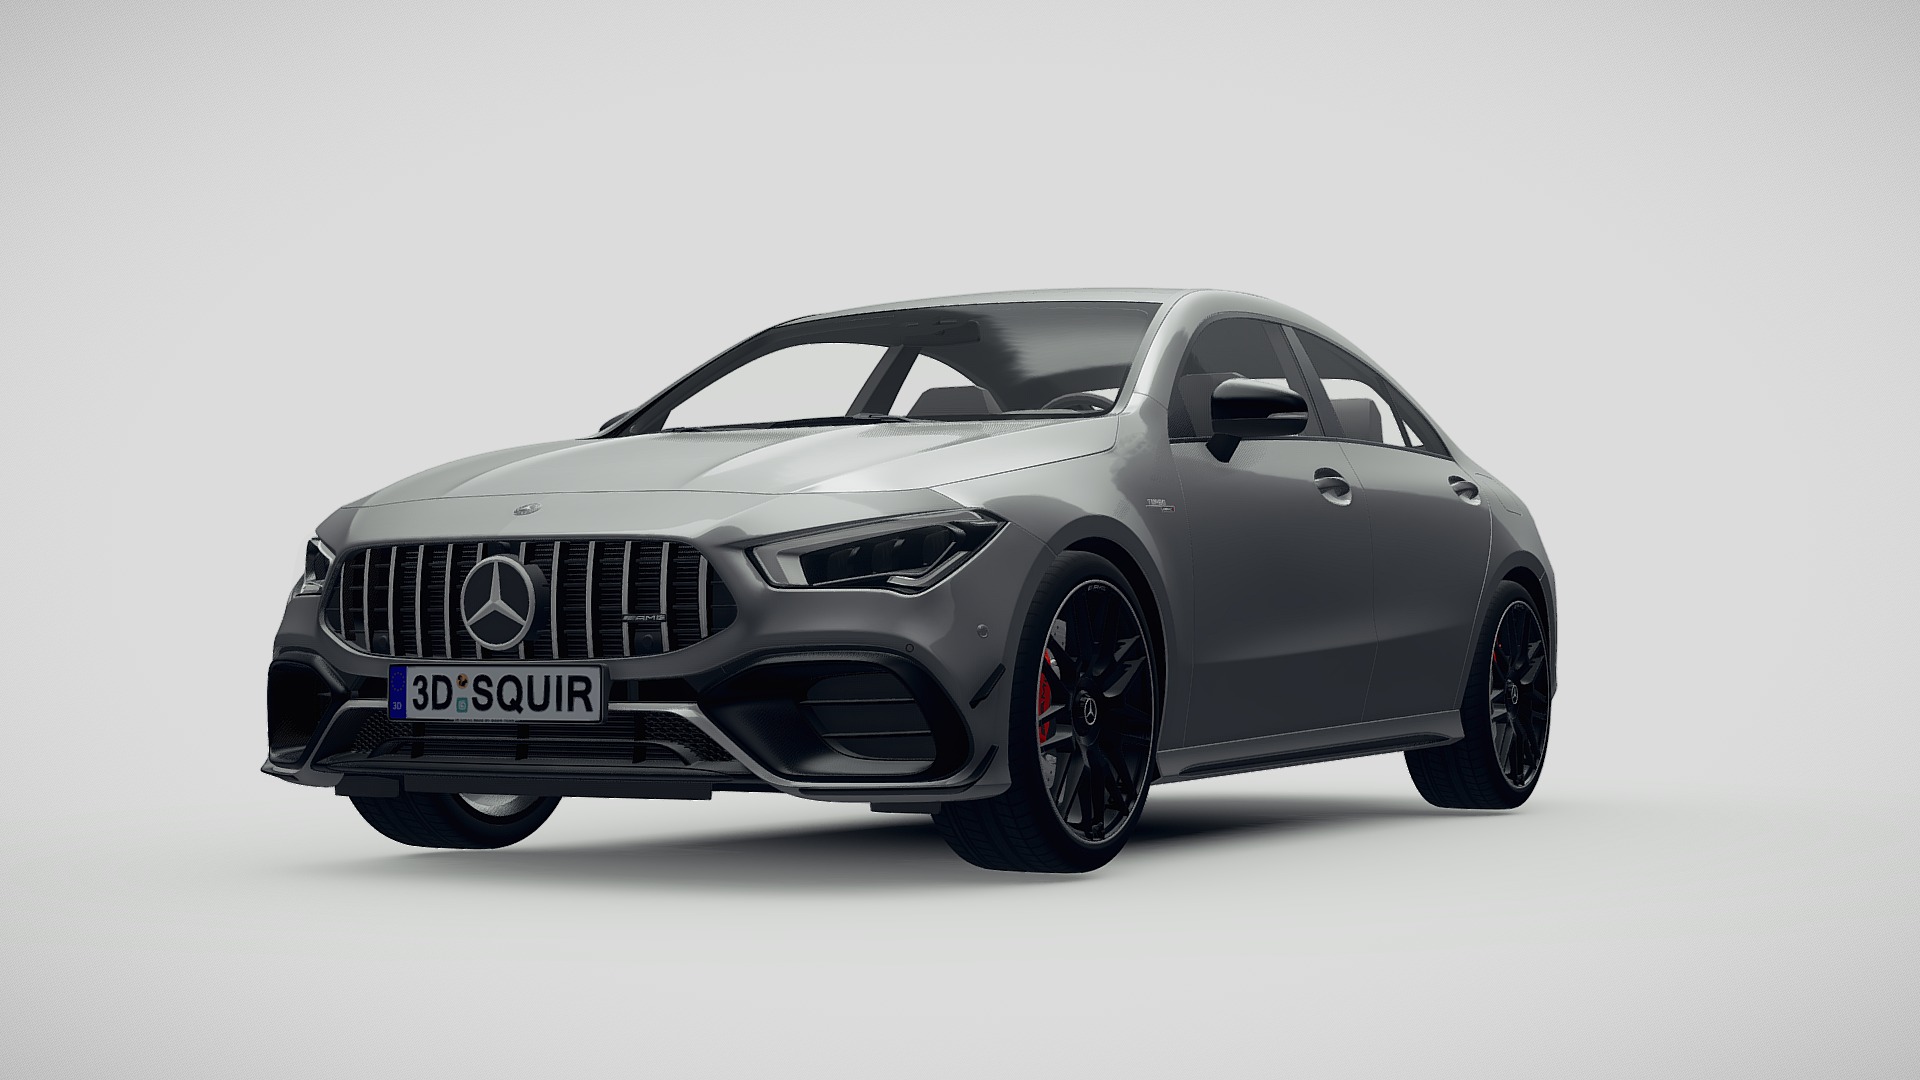 3D model Mercedes-Benz CLA45 S AMG 2020 - This is a 3D model of the Mercedes-Benz CLA45 S AMG 2020. The 3D model is about a silver car with a black license plate.